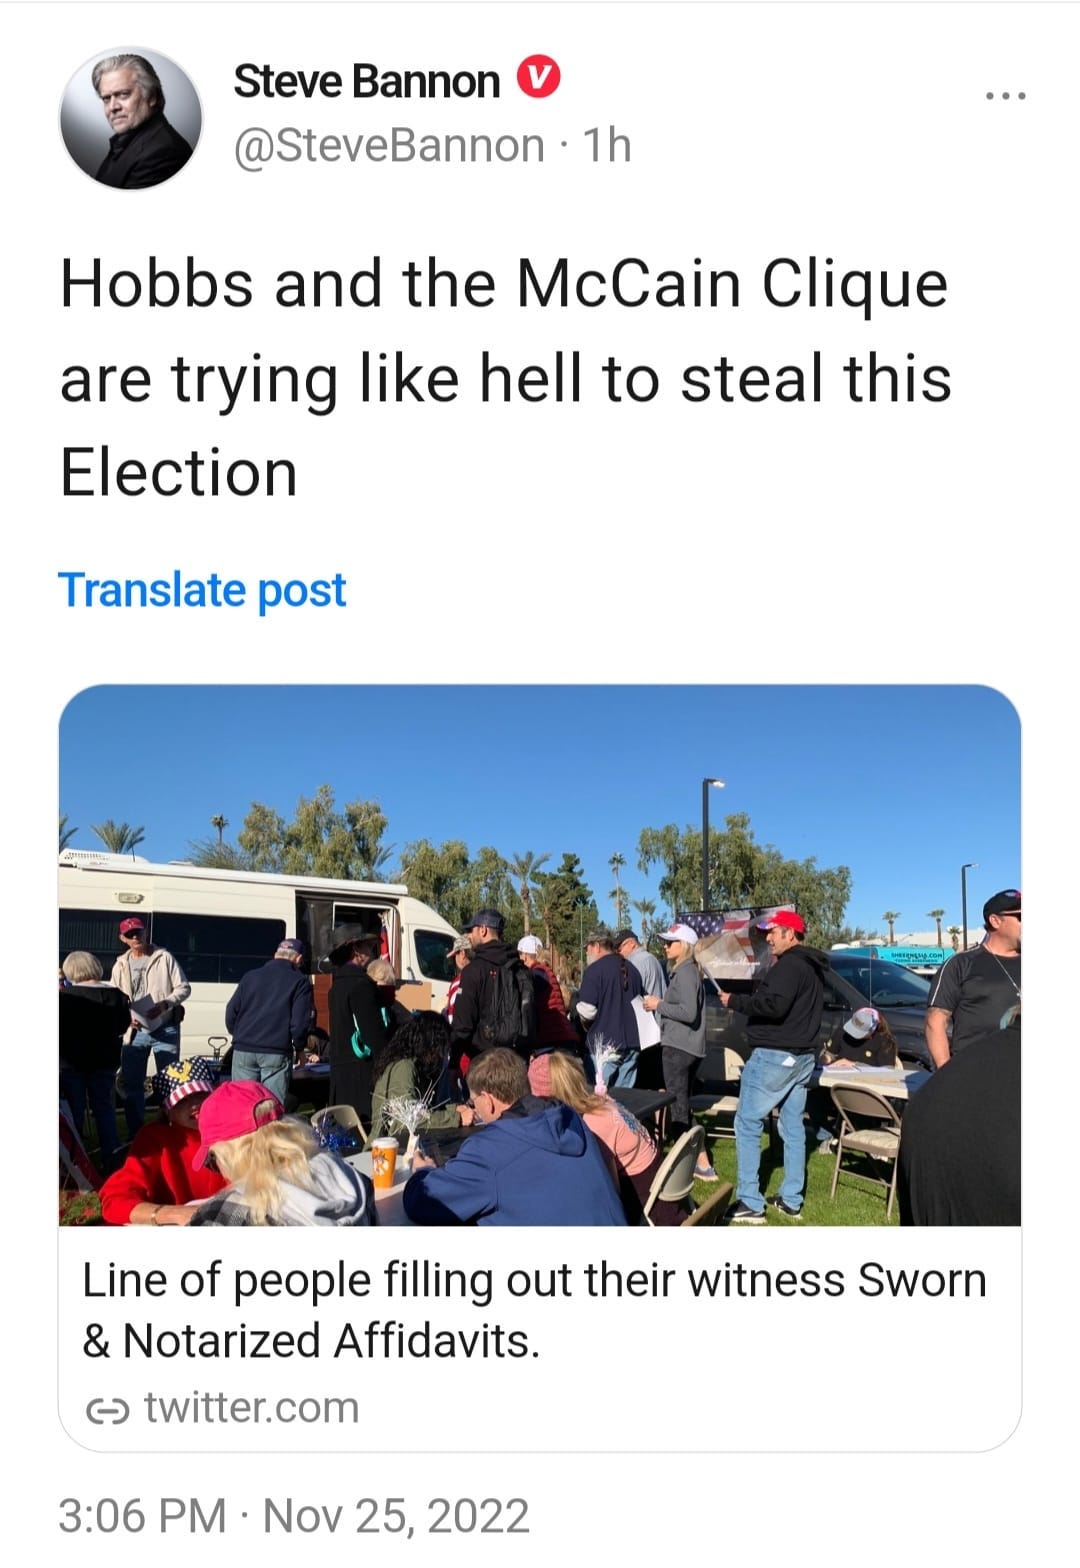 May be an image of 9 people, outdoors and text that says 'Steve Bannon @SteveBannon 1h Hobbs and the McCain Clique are trying like hell to steal this Election Translate post Line of people filling out their witness Sworn & Notarized Affidavits. ૯ twitter.com 3:06 PM Nov 25, 2022'